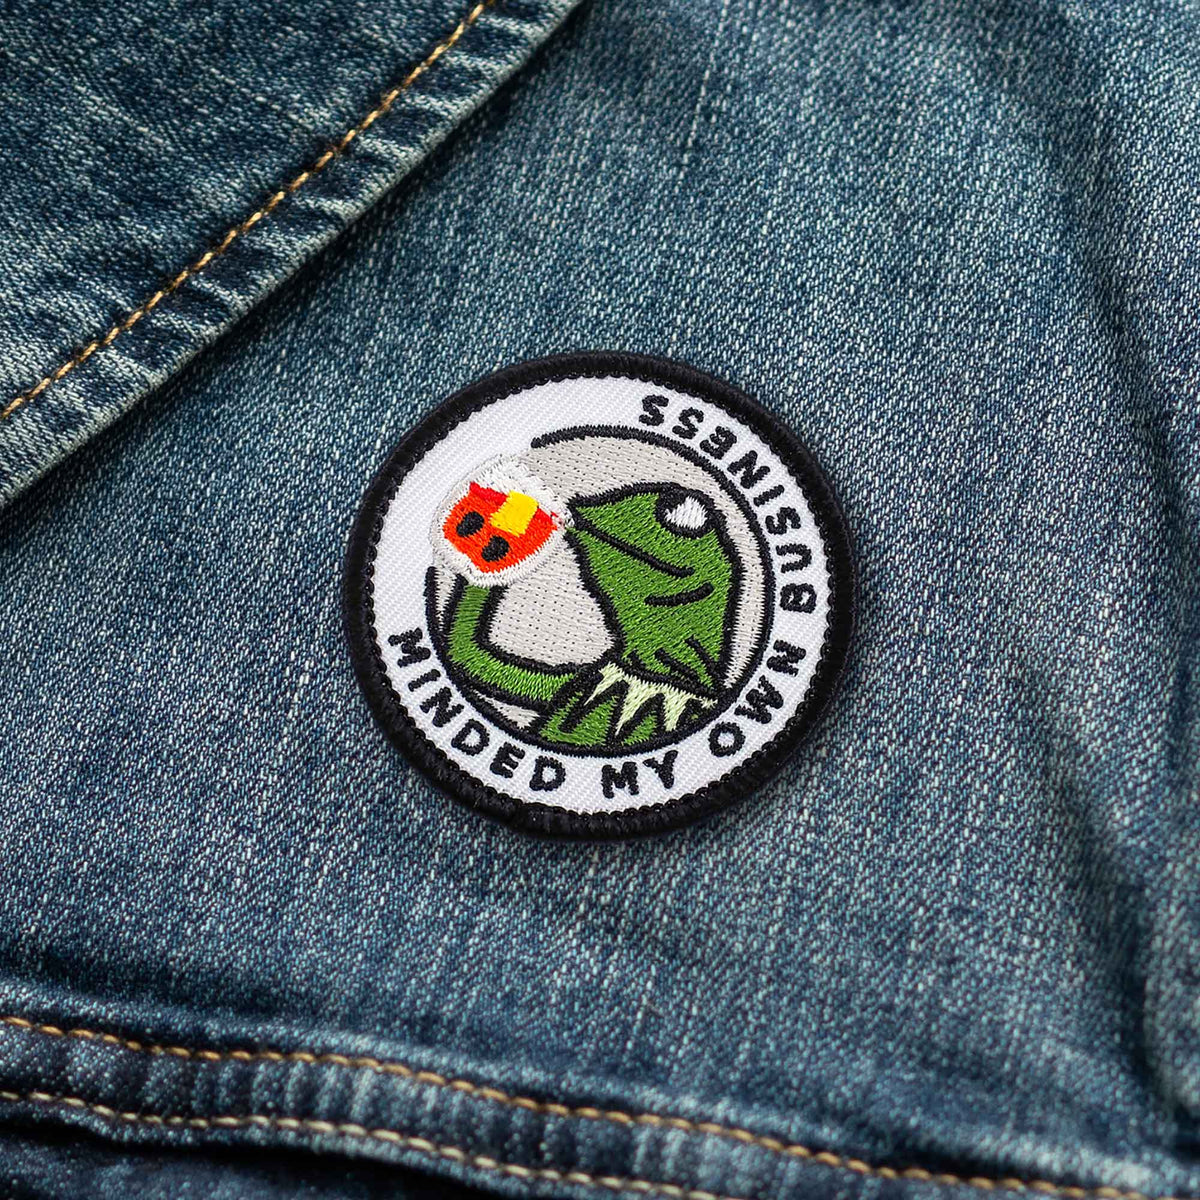 Minded My Own Business adulting merit badge patch for adults on denim jacket